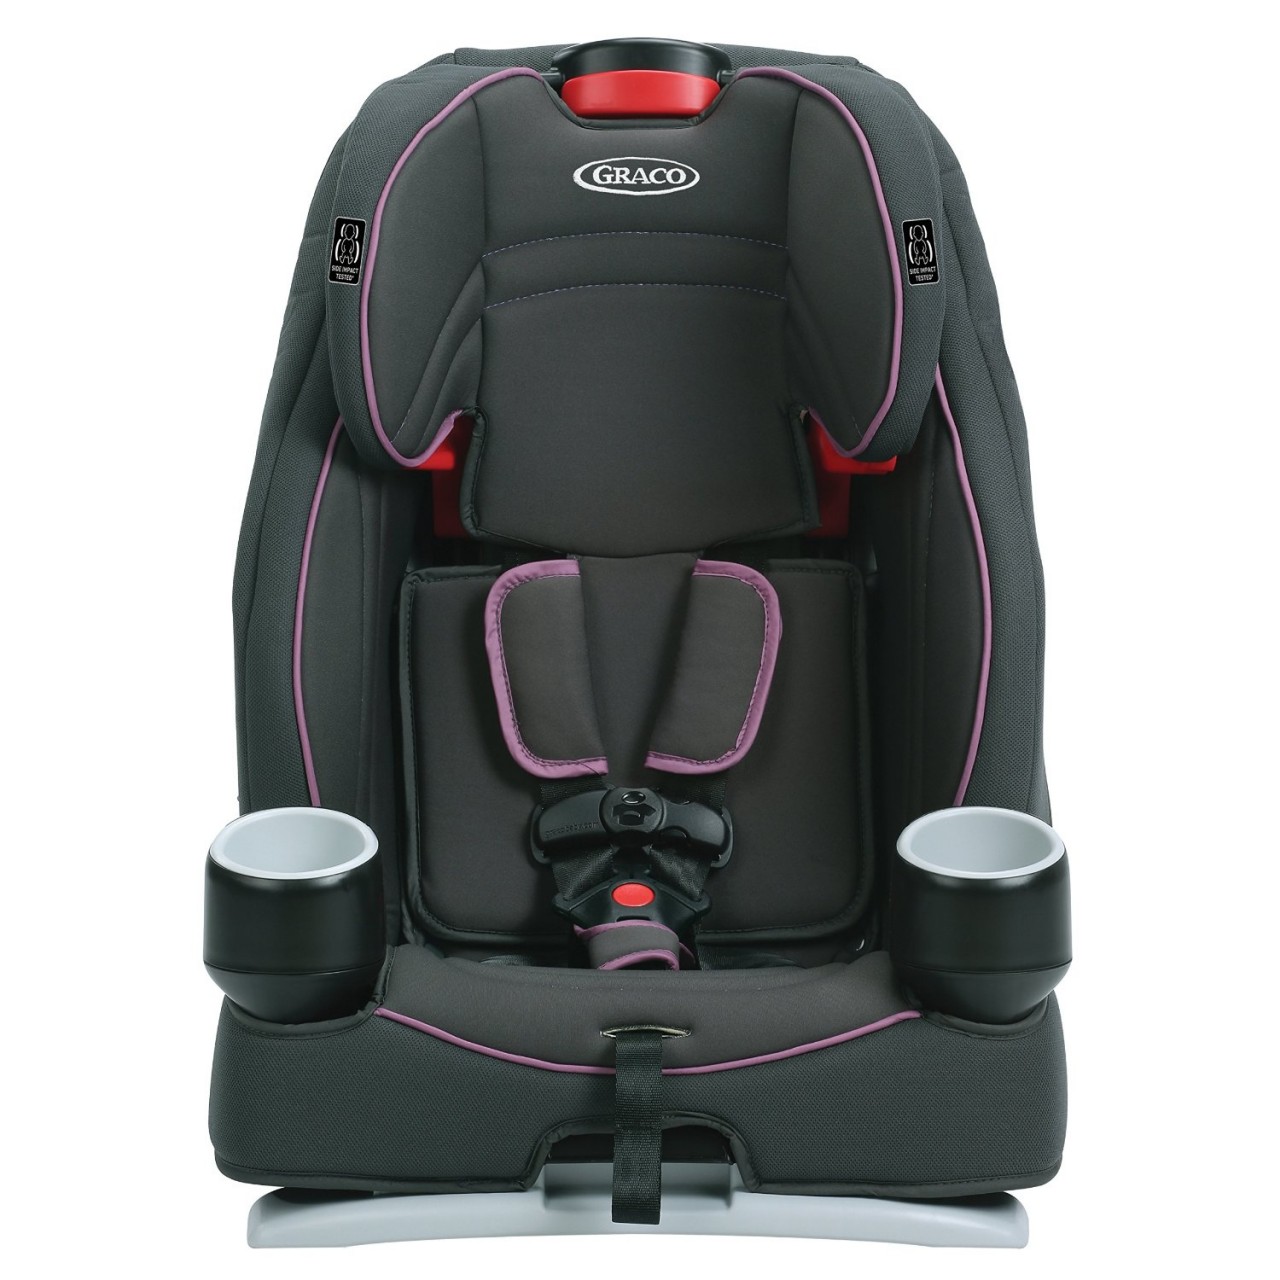 Vrijgevig Gehuurd besluiten 2016 Carseat and Stroller Preview: What's New, Improved & Coming Soon from  Graco/Baby Jogger, Hauck/iCoo, Lil Fan, Maxi-Cosi, Mifold, Mima, Nuna,  Orbit, Peg Perego, Recaro & UPPAbaby! – CarseatBlog